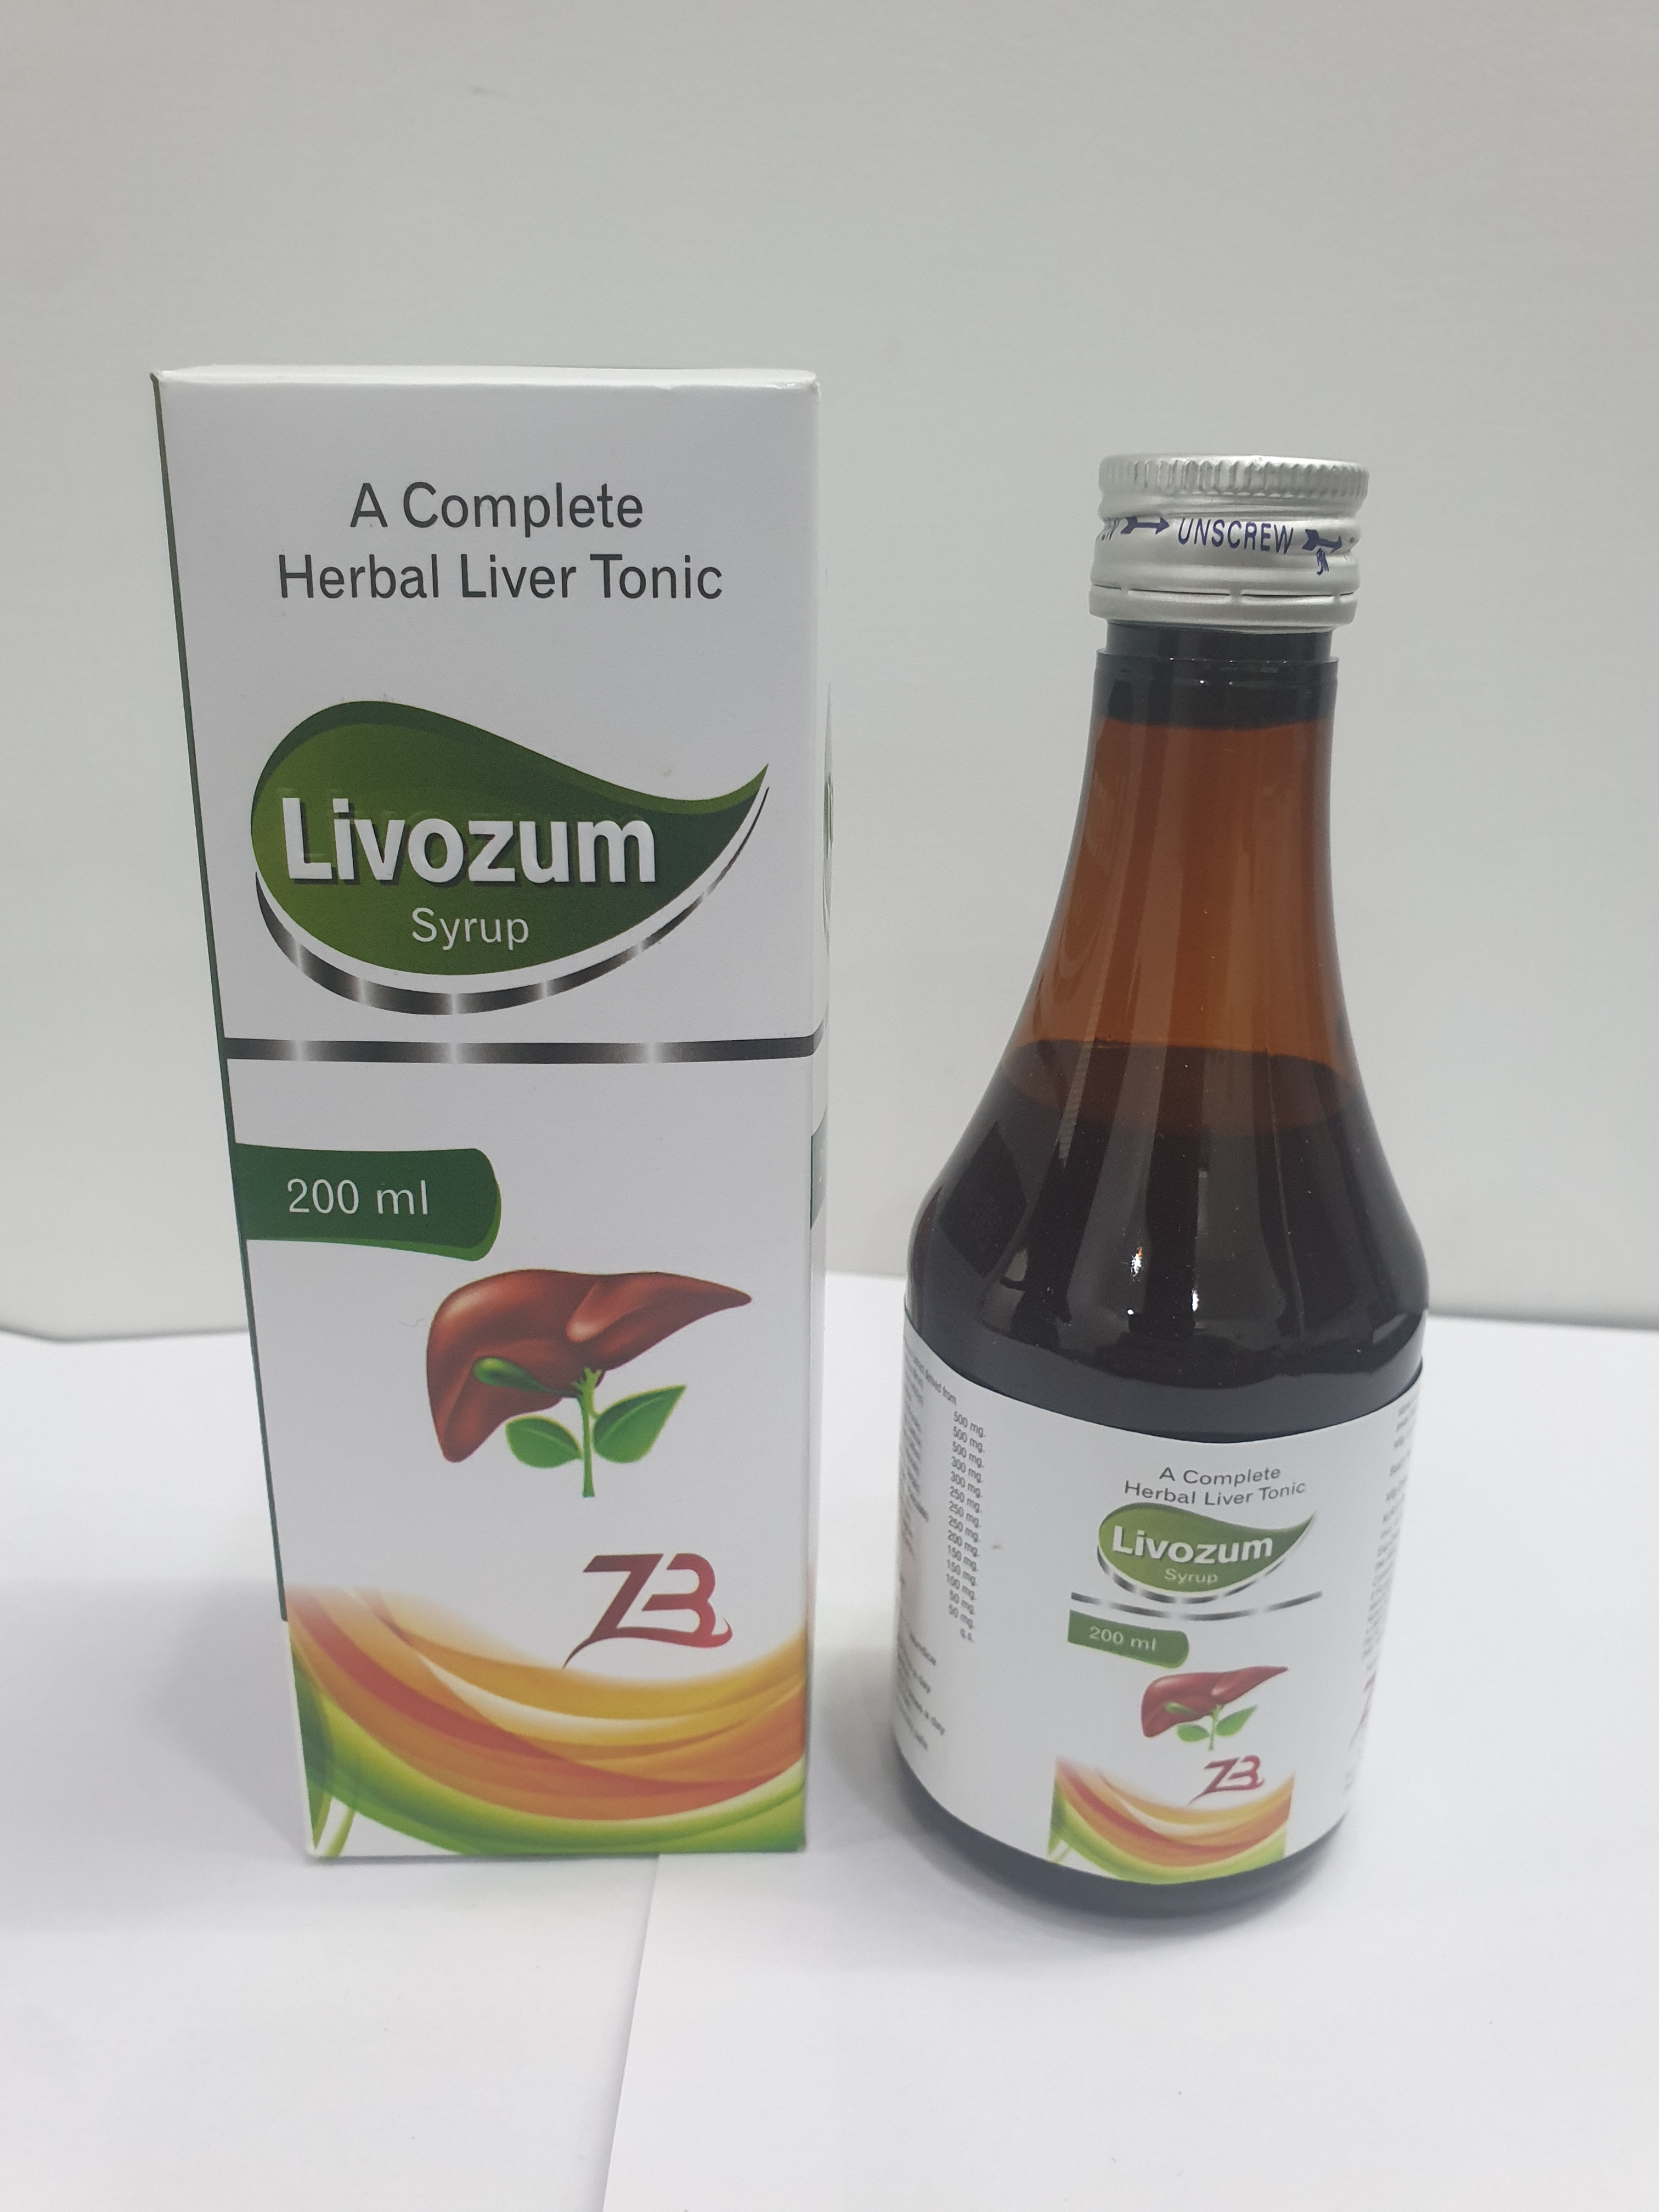 Product Name: Livozum, Compositions of A Complete Herbal Liver Tonic are A Complete Herbal Liver Tonic - Zumax Biocare